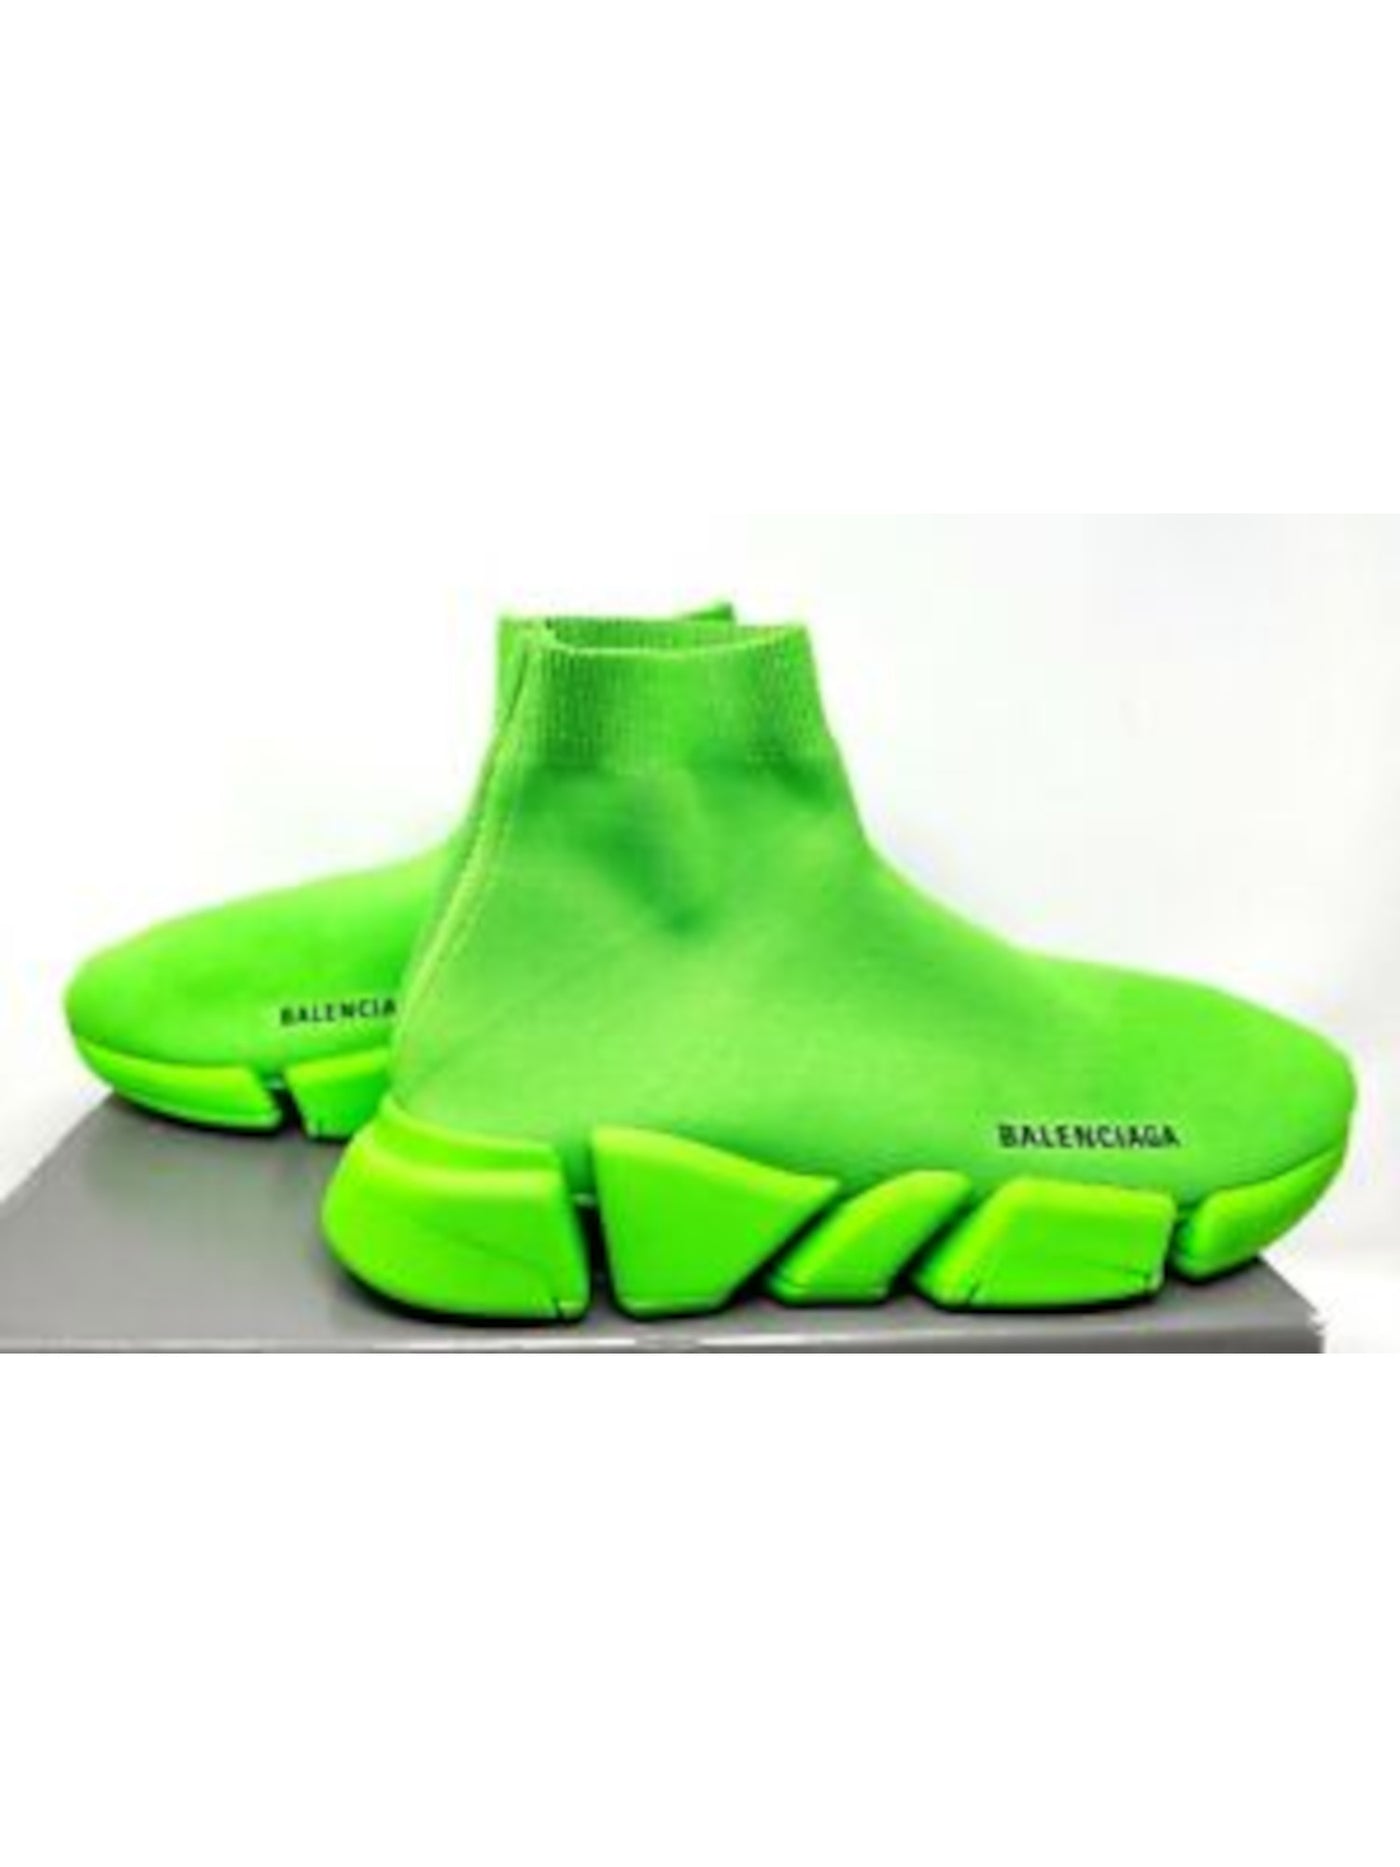 BALENCIAGA Mens Green Logo Stretch Comfort Speed 2.0 Round Toe Slip On Athletic Sneakers Shoes 13